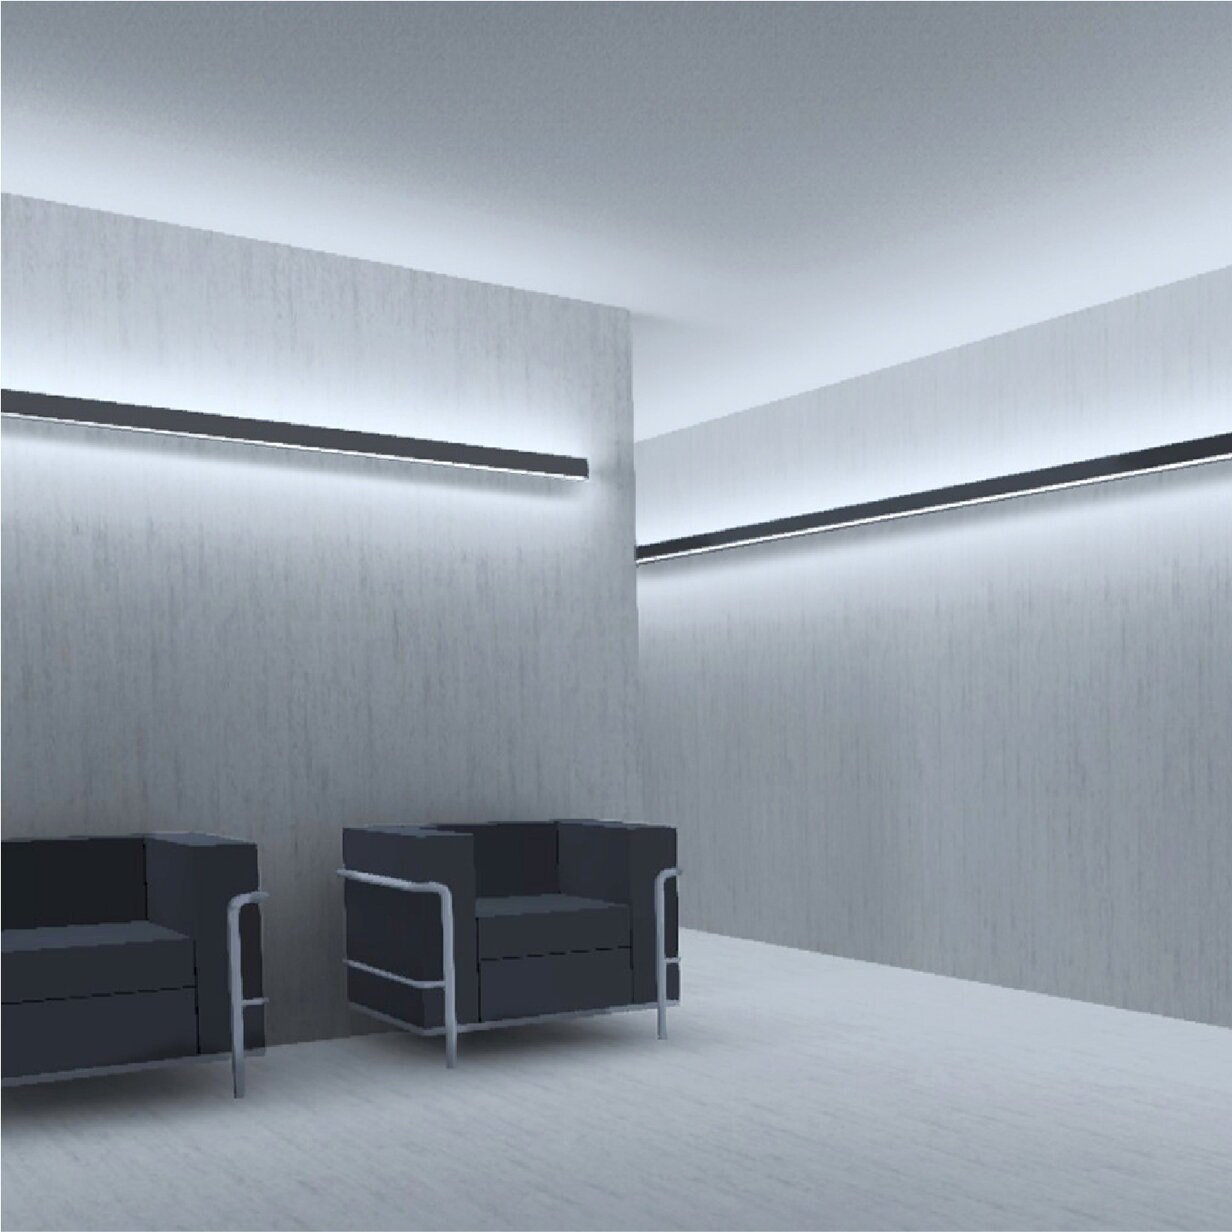 wall-mounted-linear-lighting-direct-indirect